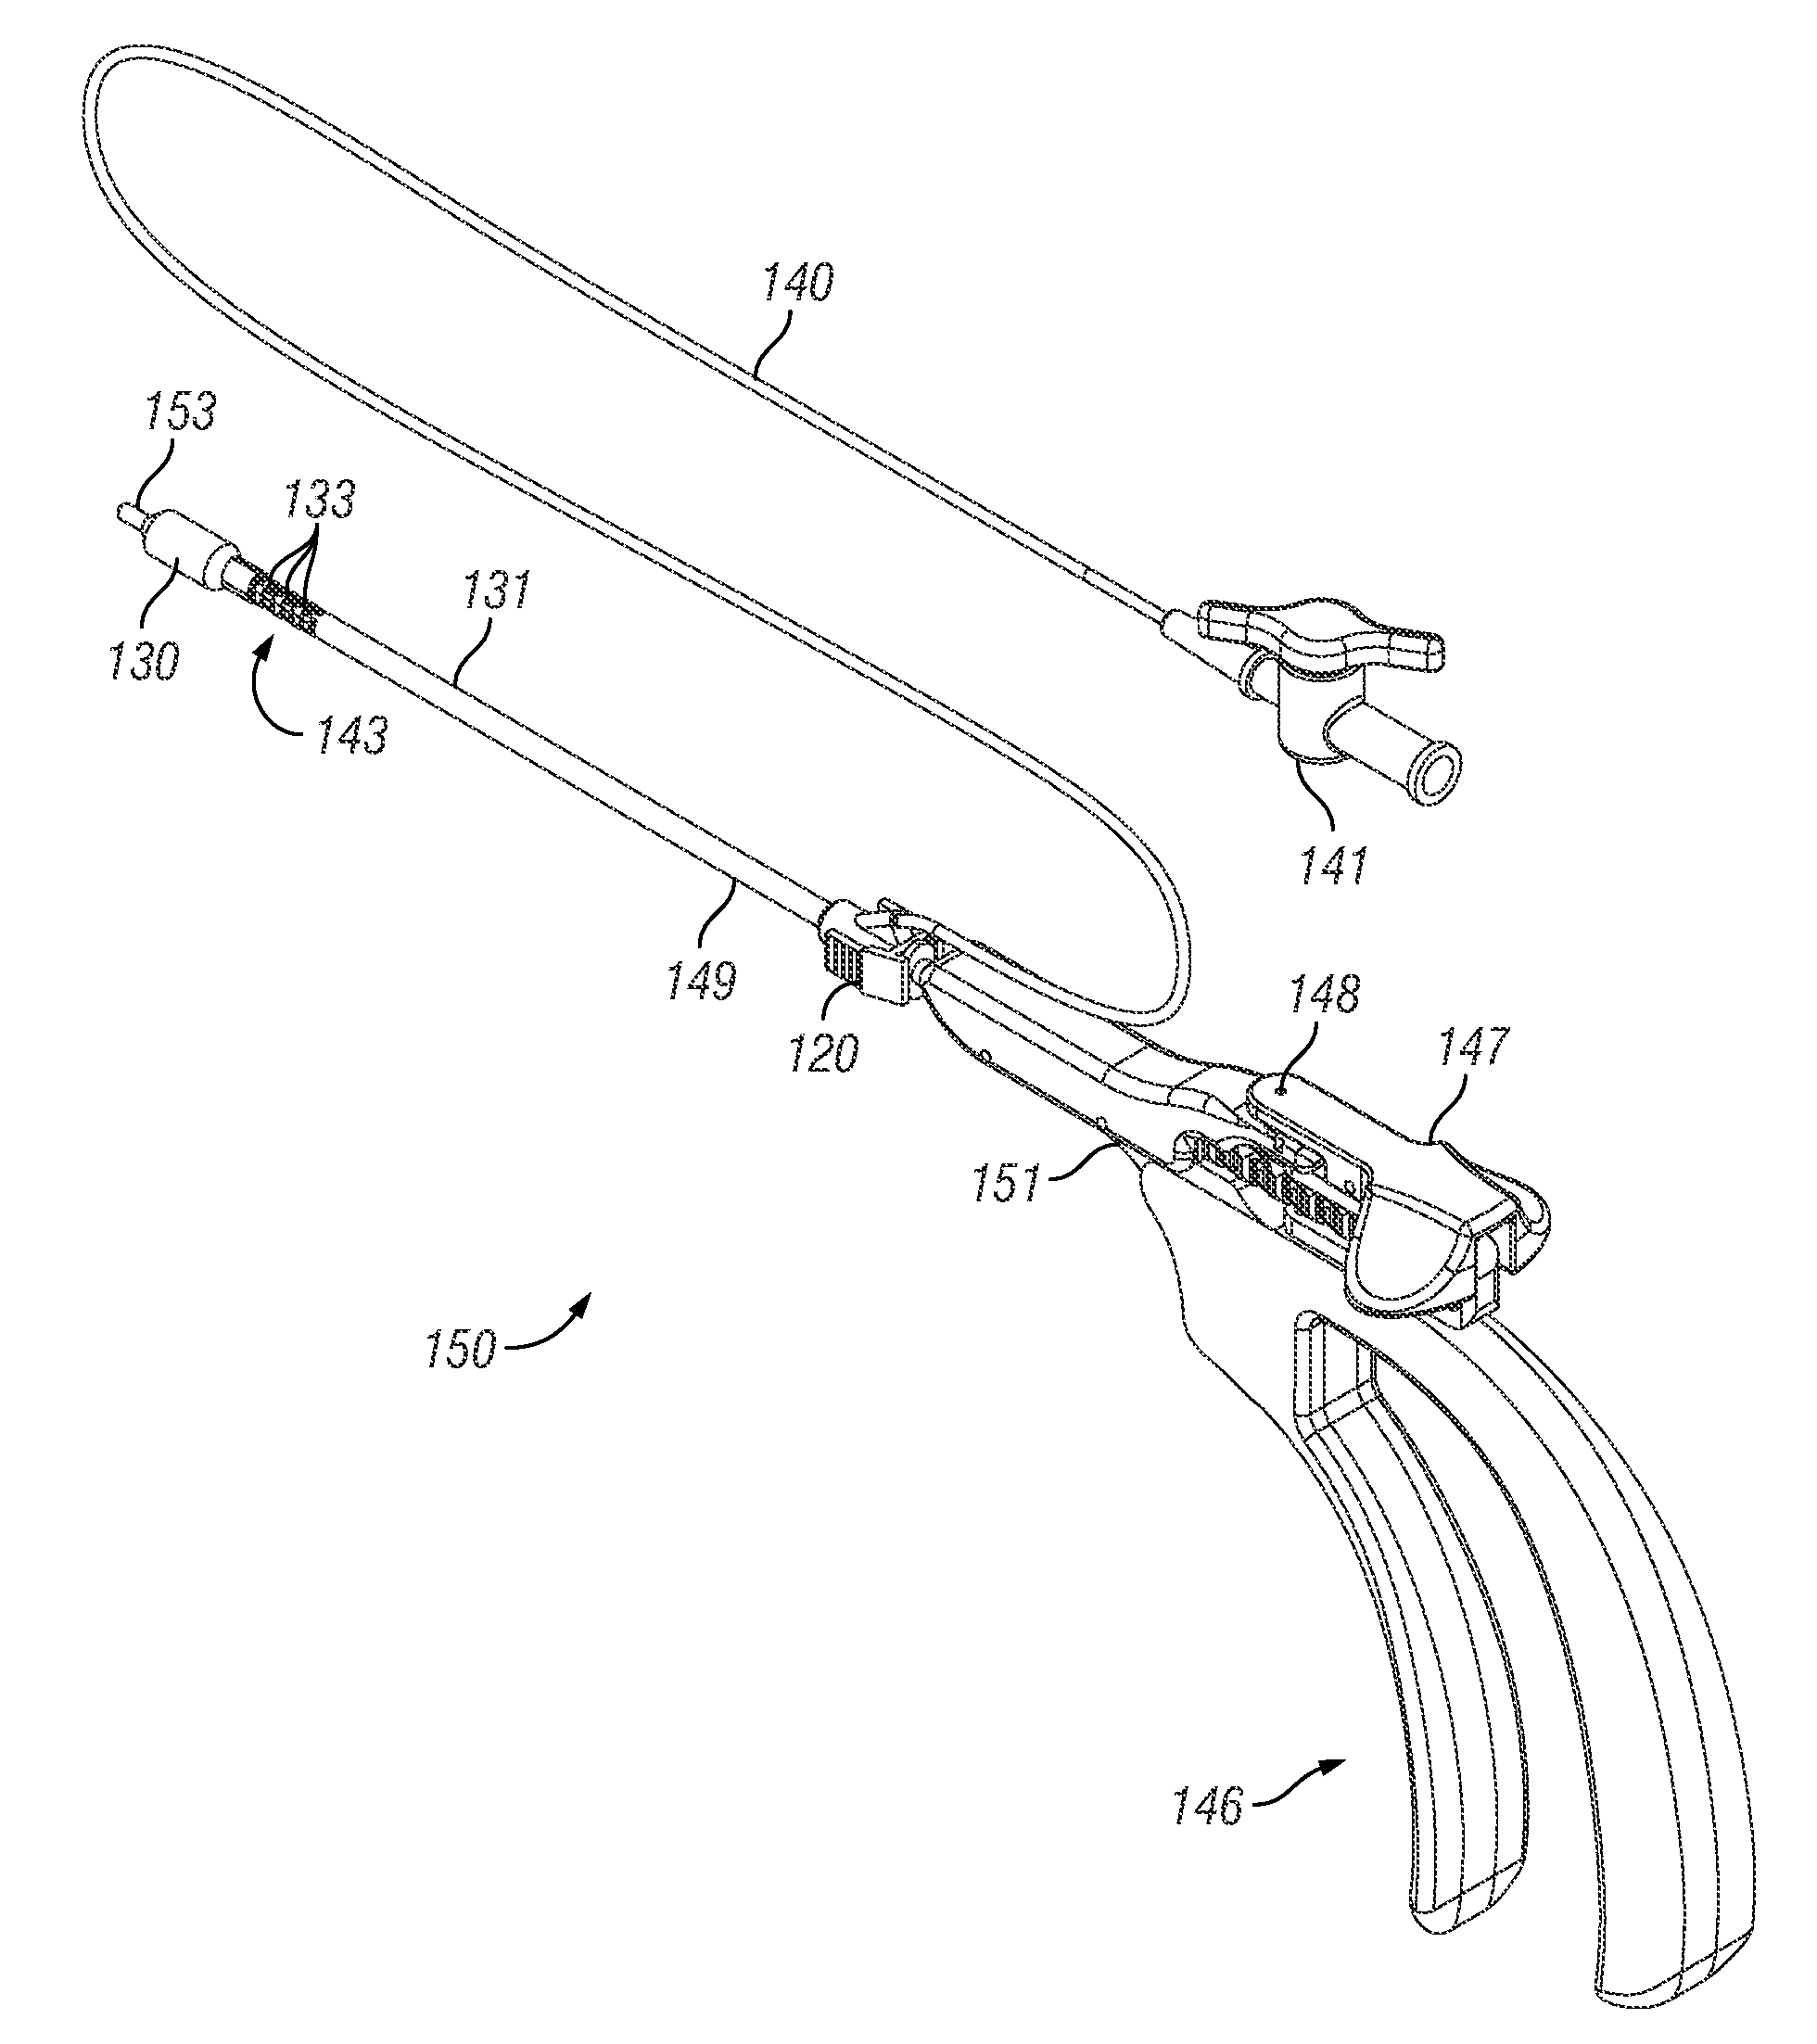 Systems, devices and methods for providing therapy to an anatomical structure using high frequency pressure waves and/or cryogenic temperatures